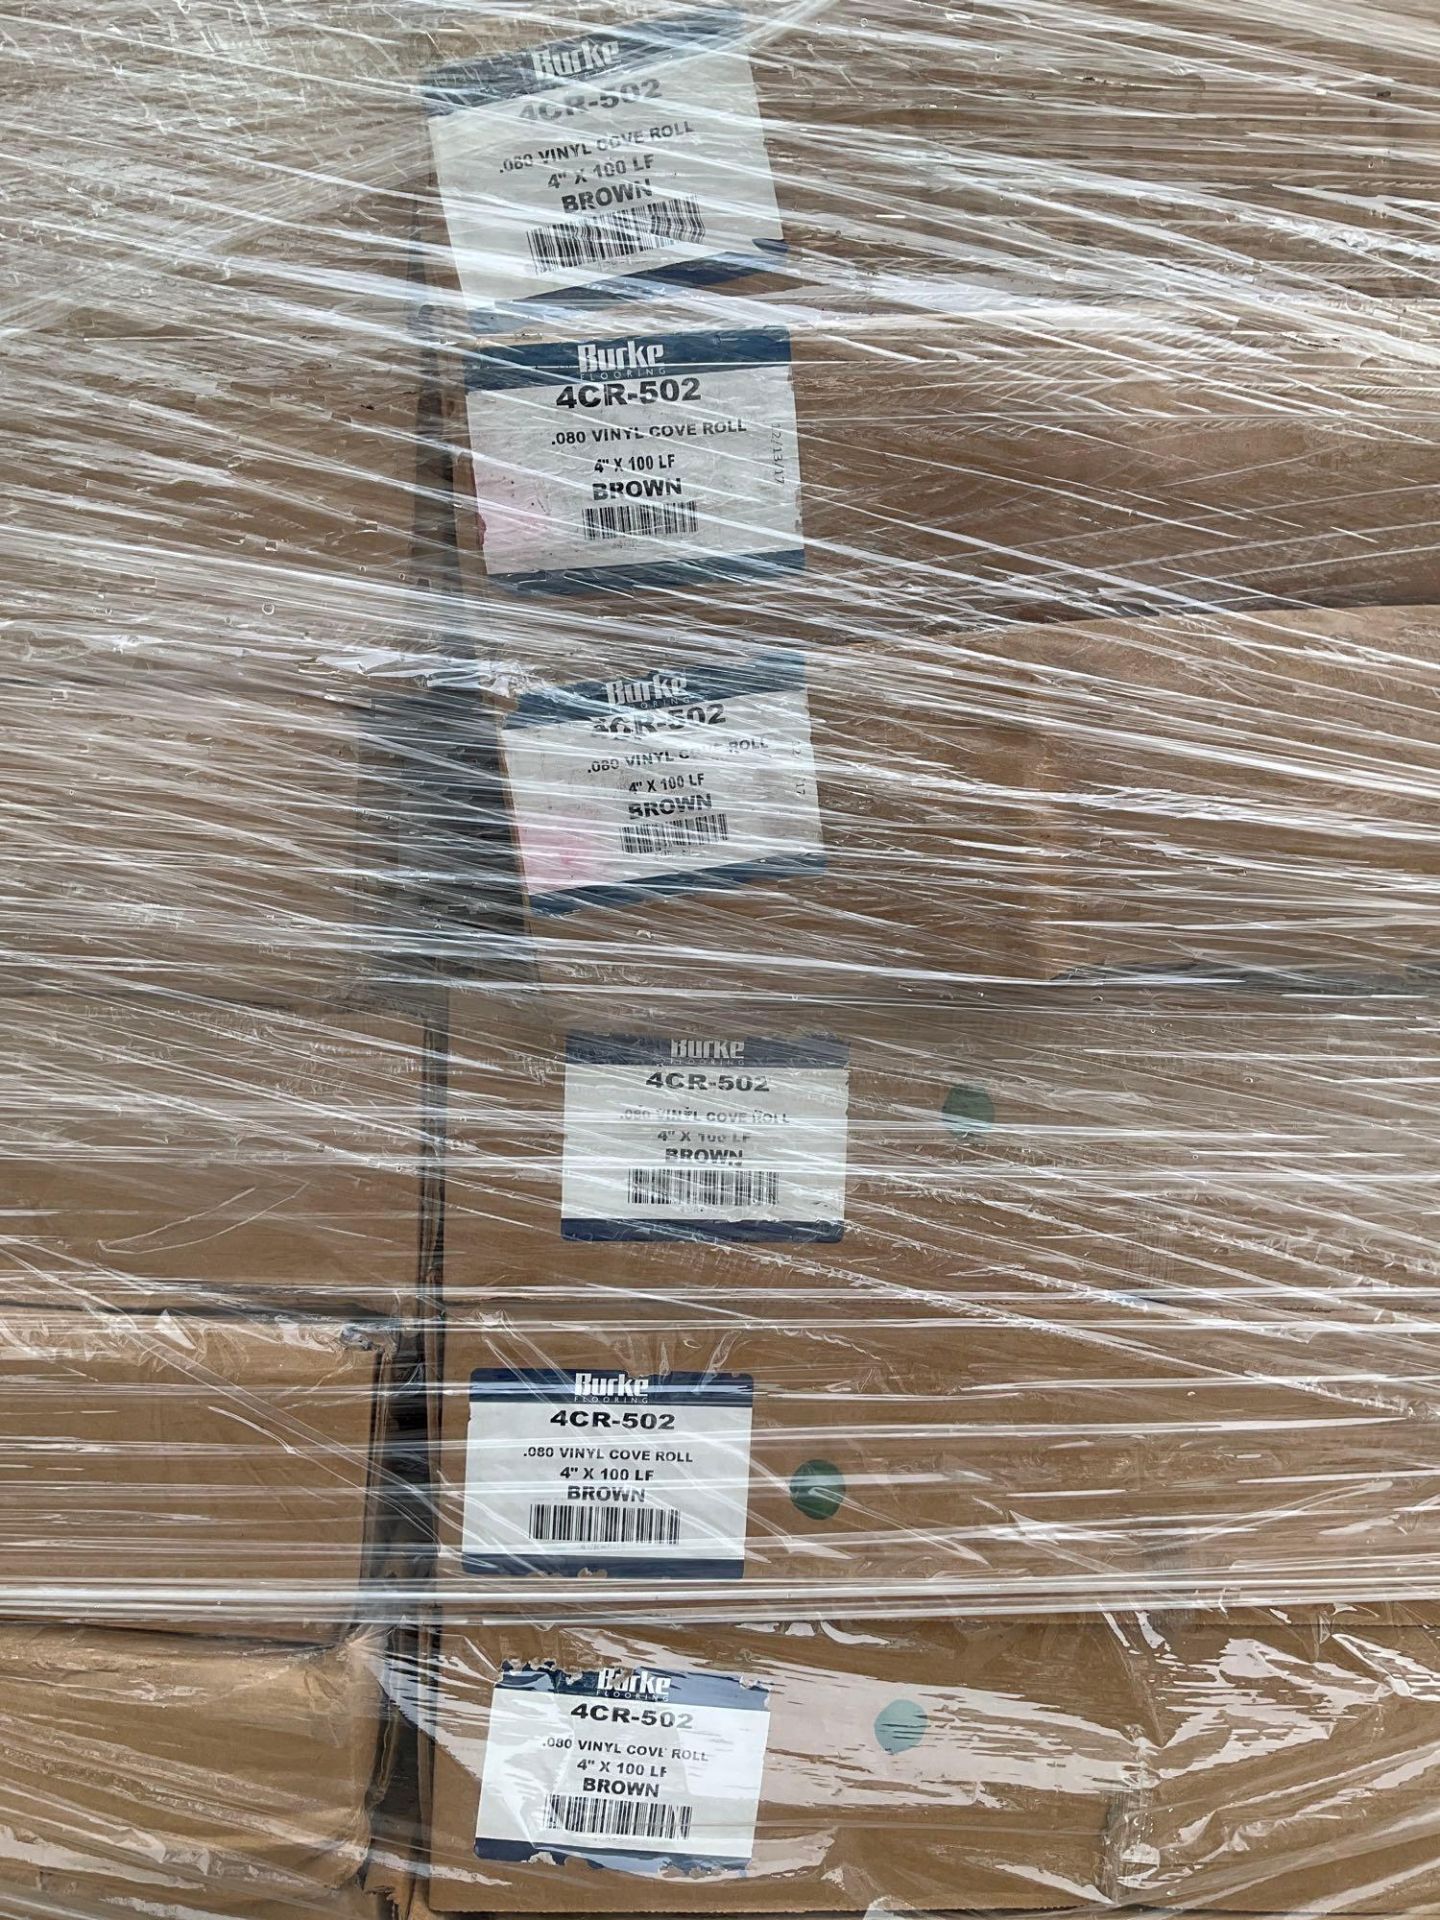 PALLET OF BURKE FLOORING 4CR-502 .080 BROWN VINYLE COVE ROLL, APPROX 4” x 100 LF, APPROX 32 BOXES - Image 4 of 4